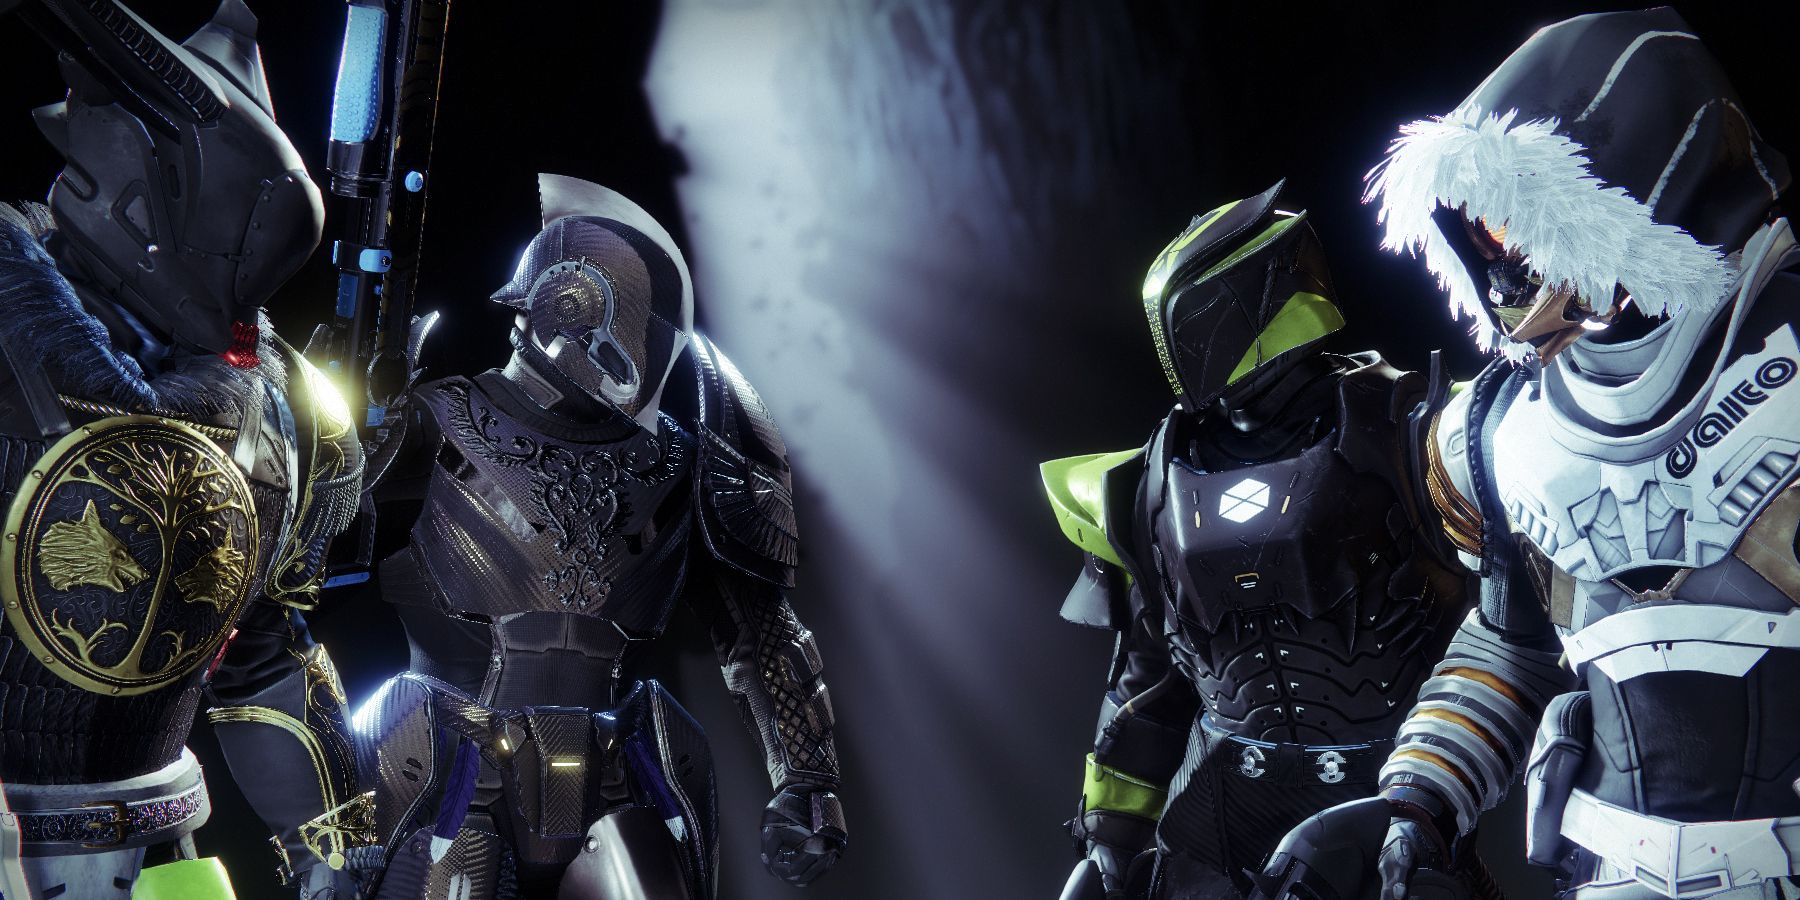 Guardians prepare to face off in the Trials of Osiris game mode in Destiny 2.